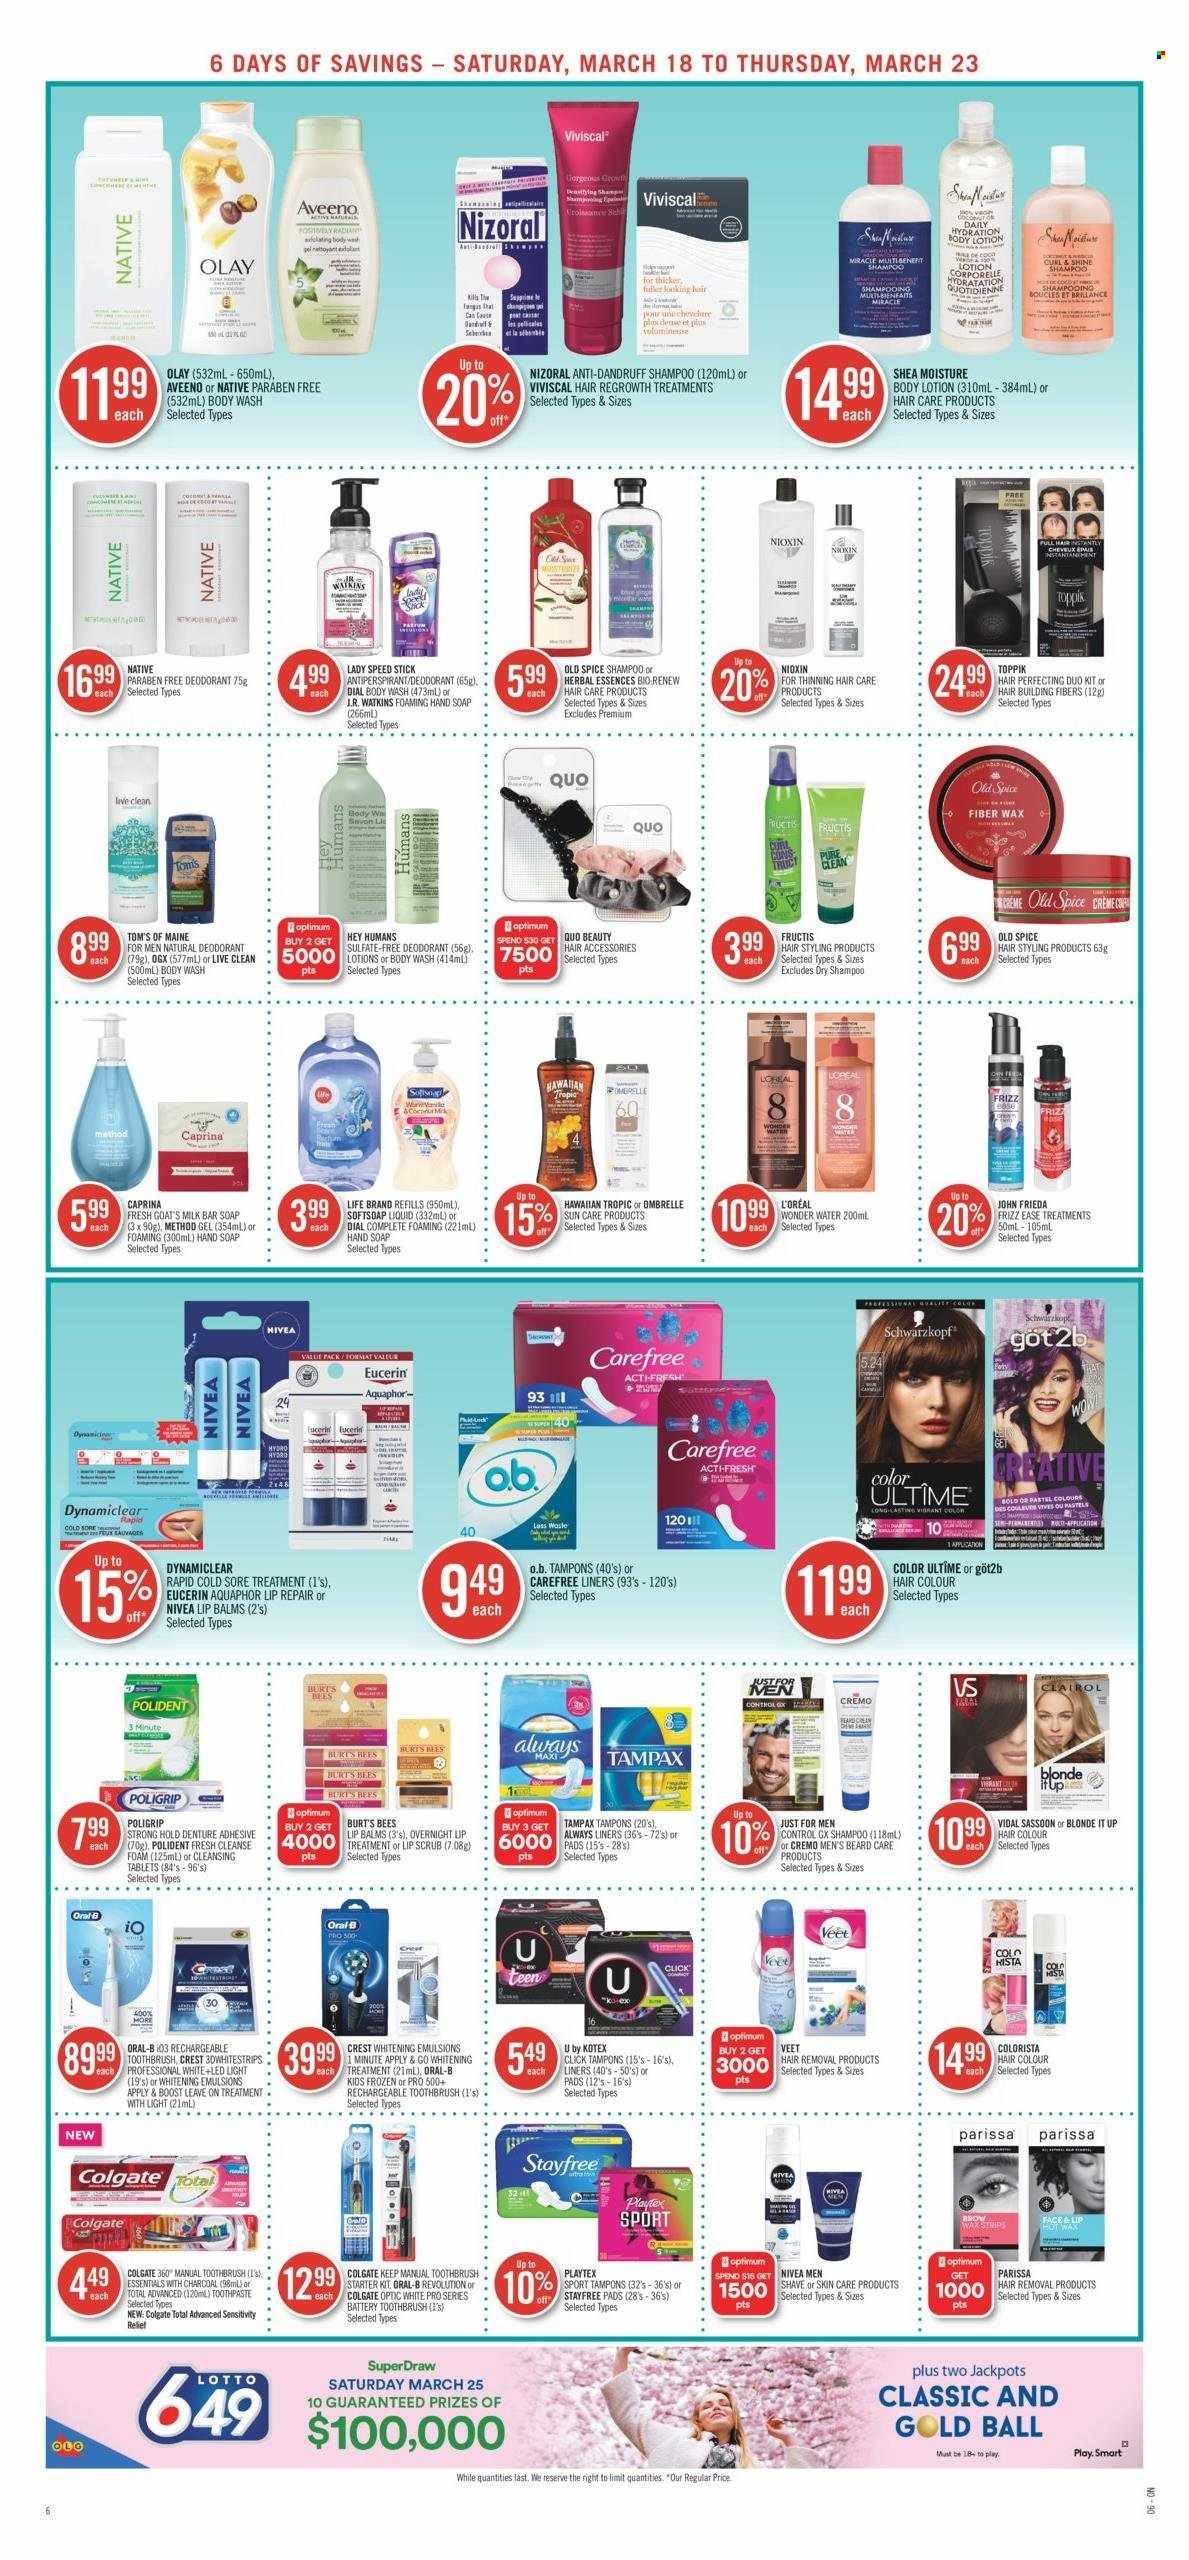 thumbnail - Shoppers Drug Mart Flyer - March 18, 2023 - March 23, 2023 - Sales products - milky bar, spice, water, Boost, Aquaphor, Aveeno, Nivea, Always liners, body wash, Softsoap, hand soap, soap bar, Dial, soap, toothbrush, toothpaste, Polident, Crest, Stayfree, Playtex, Carefree, Kotex, tampons, L’Oréal, Olay, OGX, Clairol, hair color, Herbal Essences, John Frieda, Toppik, Fructis, body lotion, anti-perspirant, Speed Stick, hair removal, Veet, Optimum, Lotto, Colgate, Eucerin, shampoo, Tampax, Old Spice, Oral-B, Schwarzkopf, deodorant. Page 7.